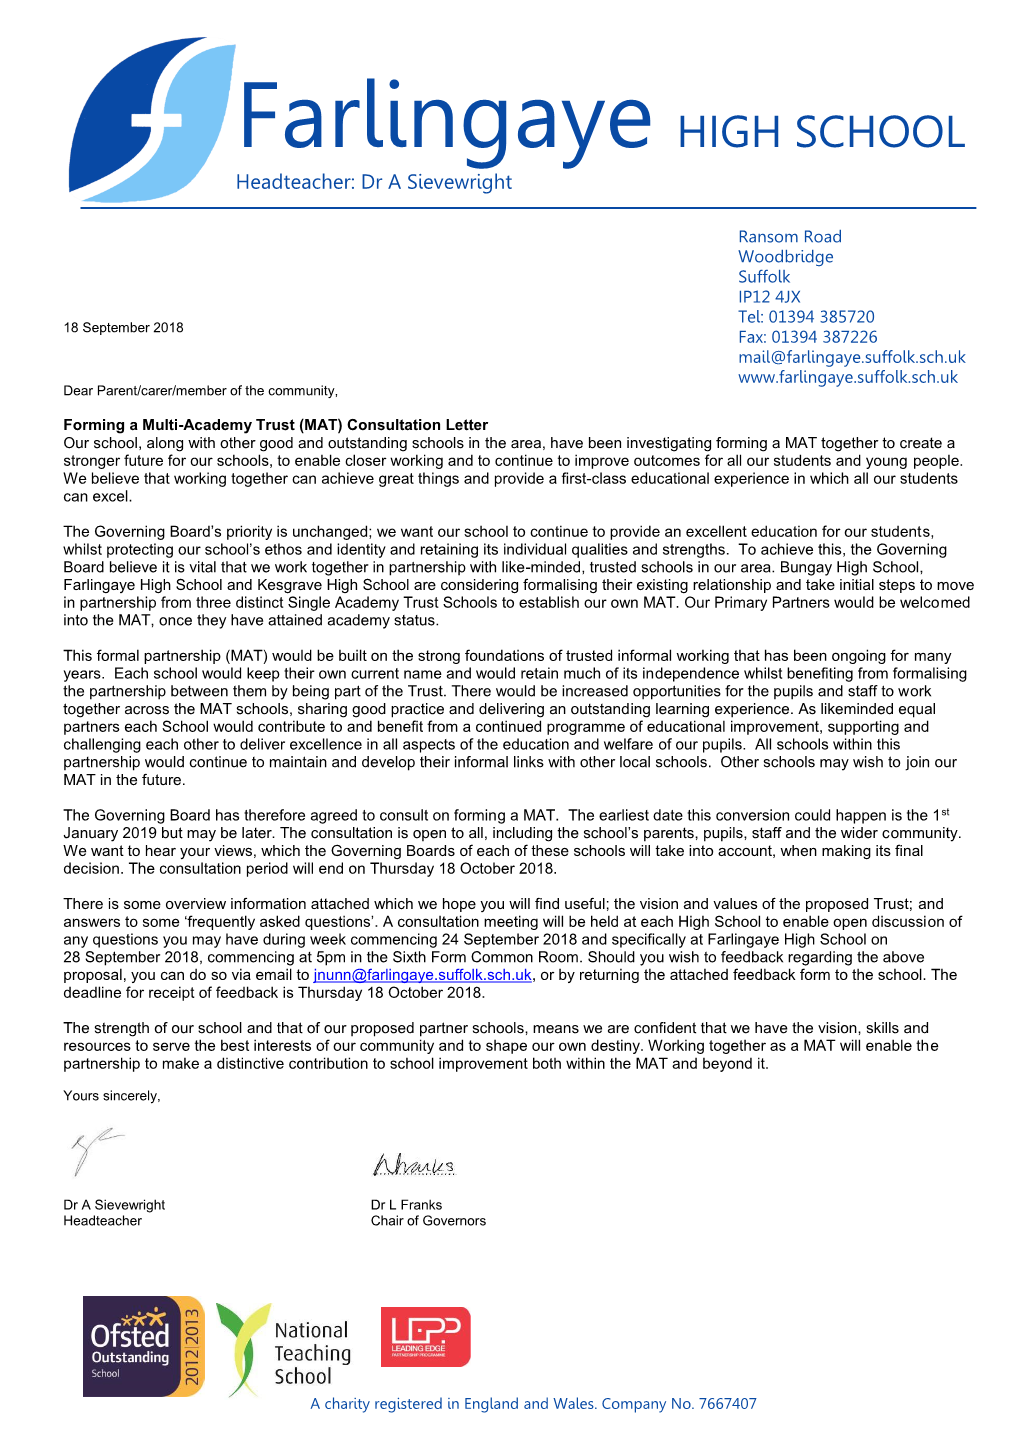 MAT Consultation Letter from Head Teacher to Parents/Carers